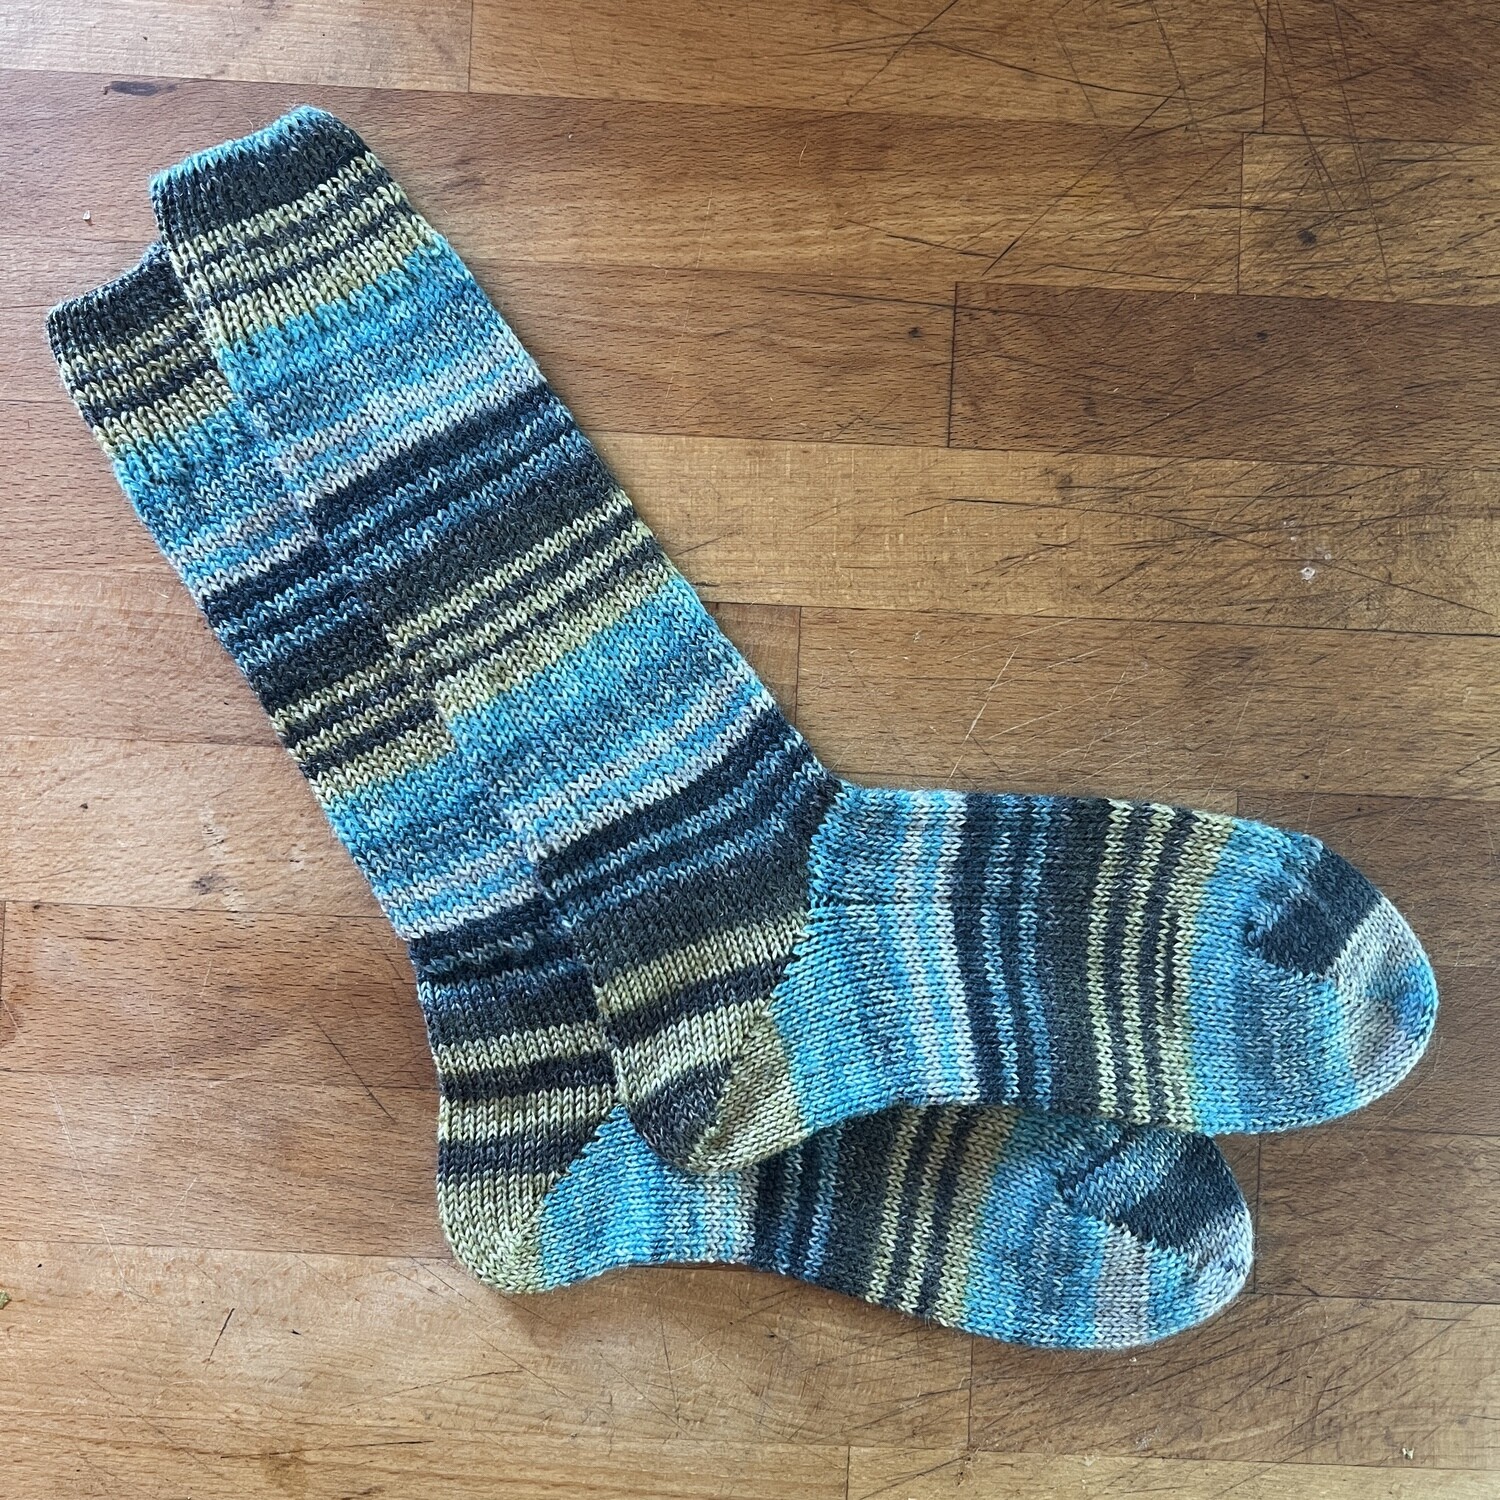 Woman's Crew Sock Size 10 - 11 Edenderry - Teal, Green, Gray